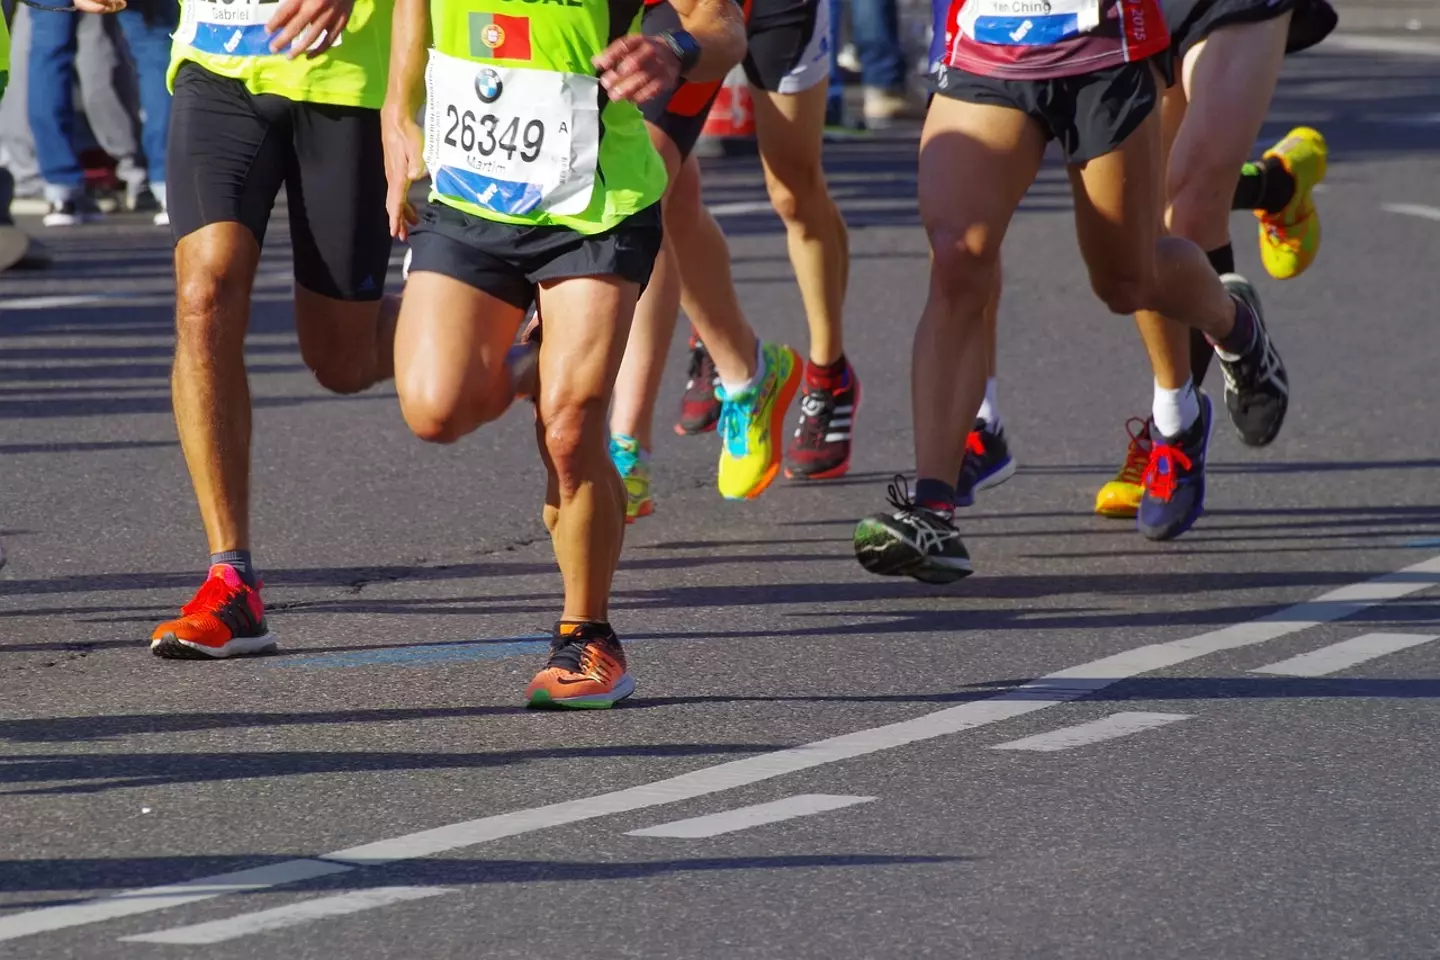 An investigation has been opened after thousands of marathon runners allegedly cheated their way to a finishers medal.